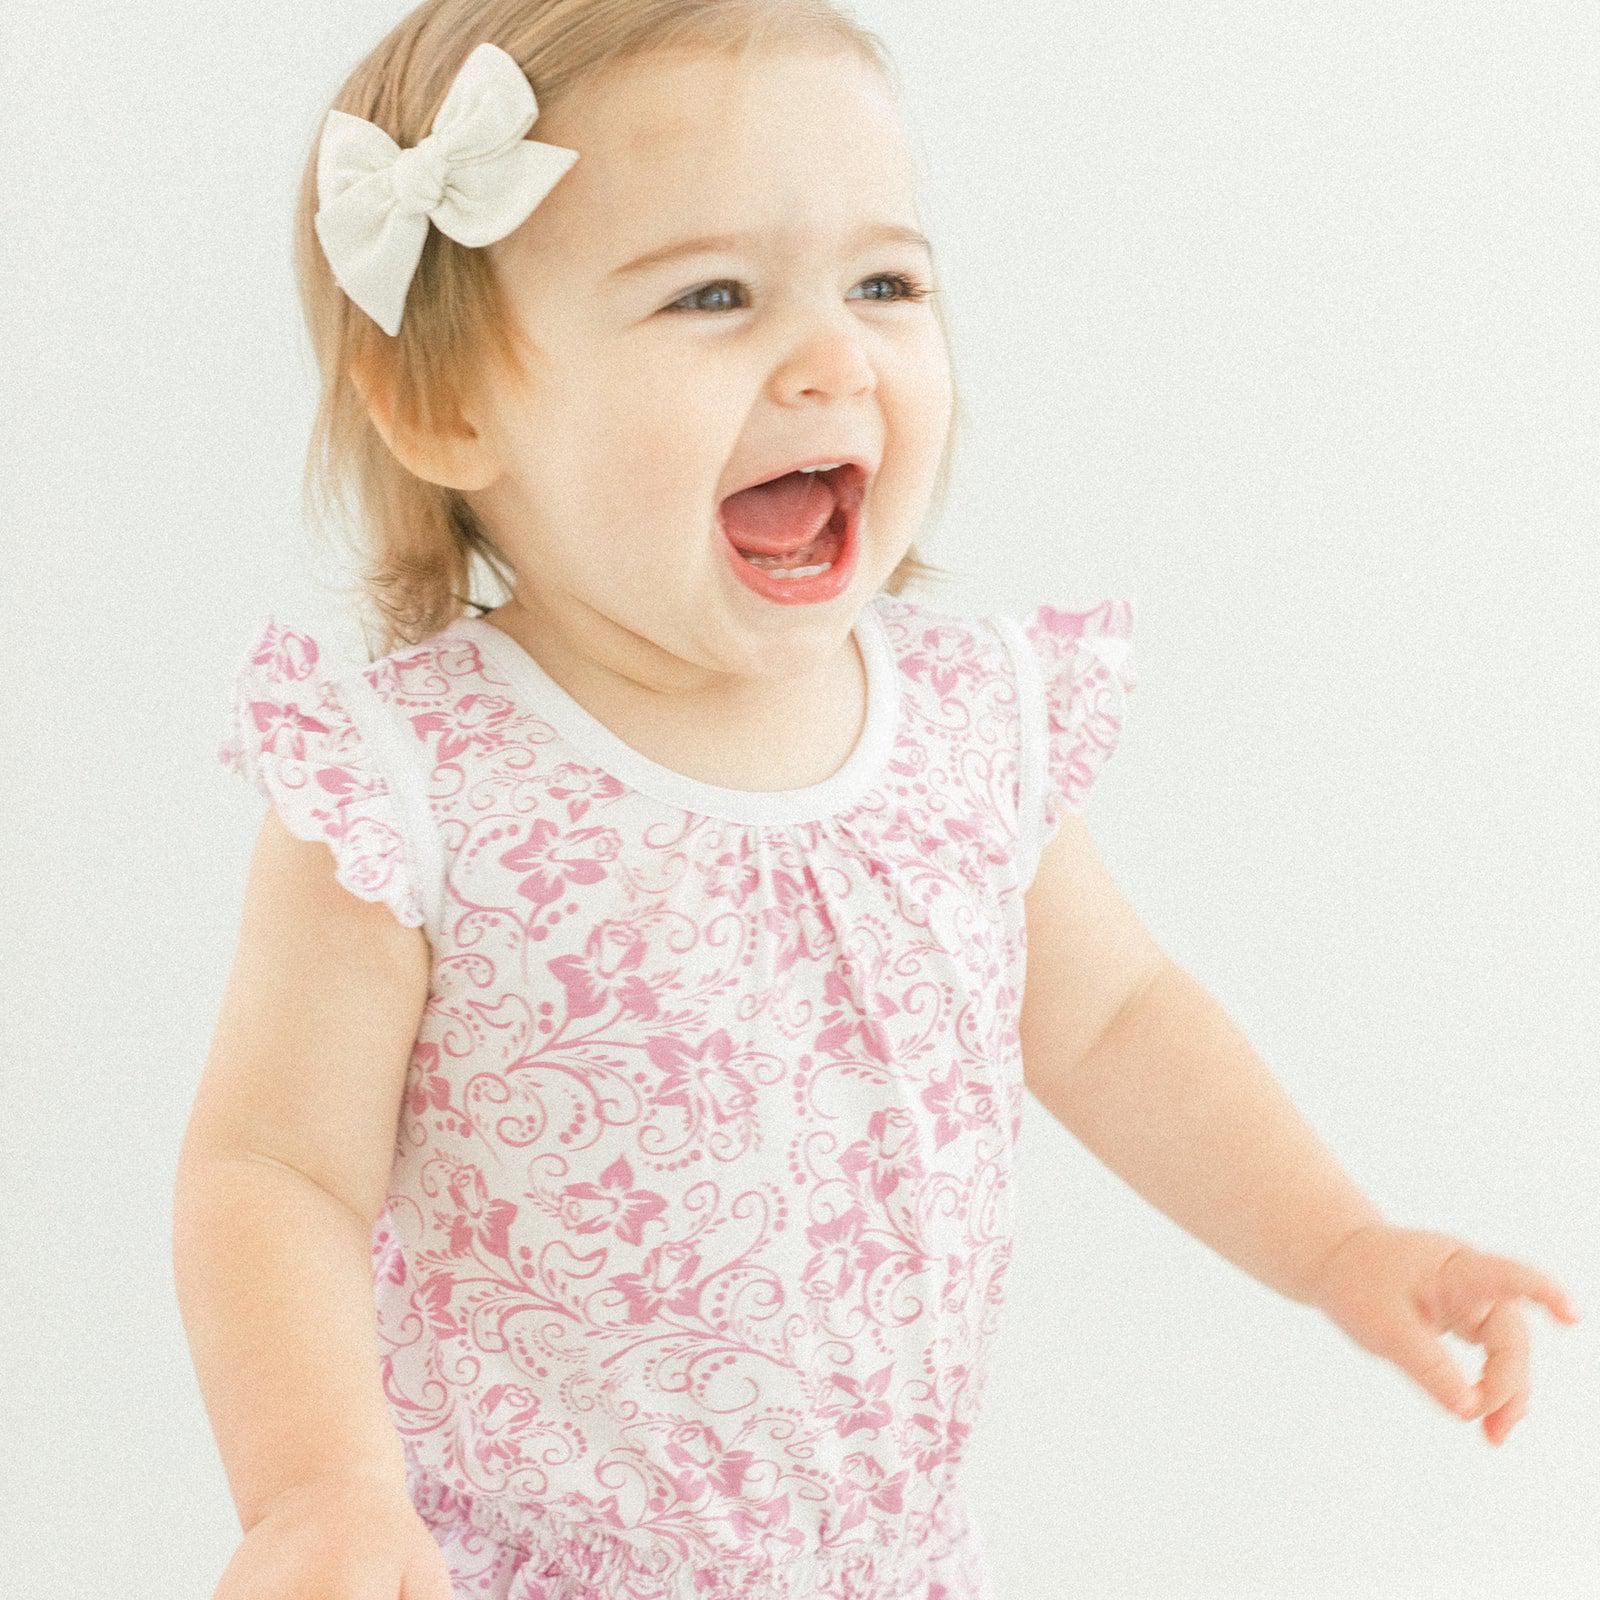 [Free_Shipping]-[Pima_Cotton]-Short Rompers-[Baby_Gift]-[Shower_Gift]-[Designer]-Feather Baby